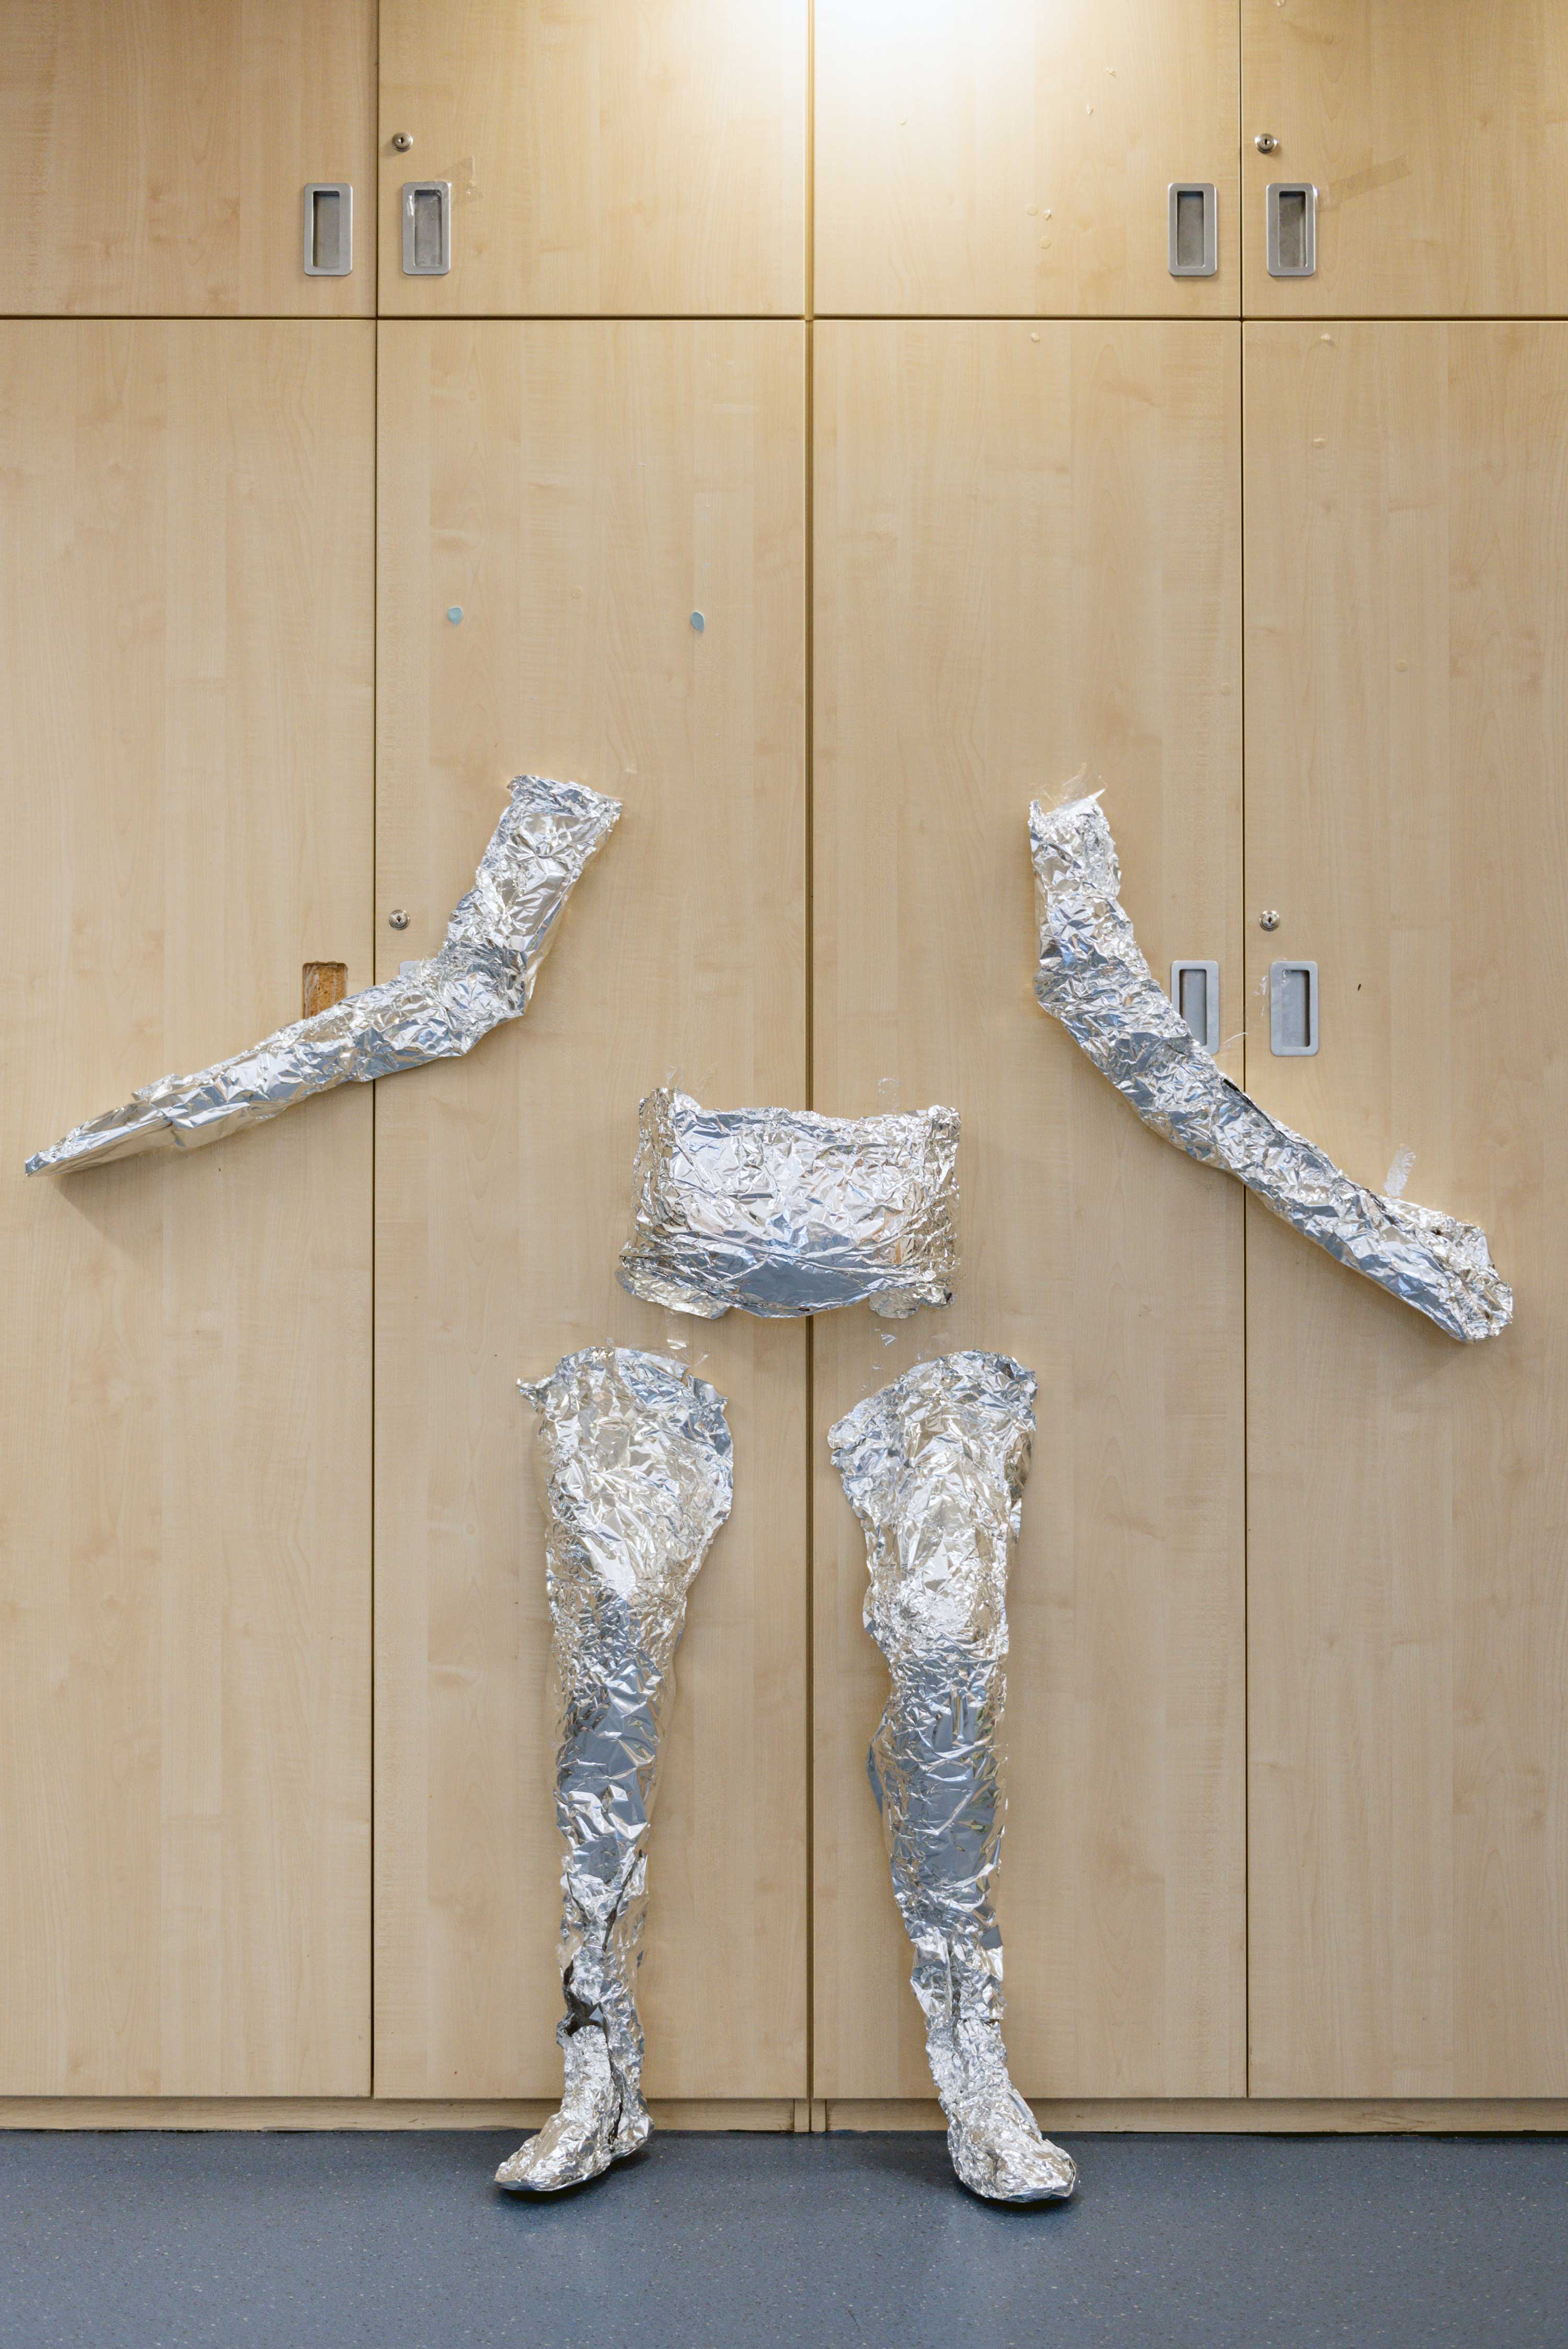 A life sized cast of a body made of foil